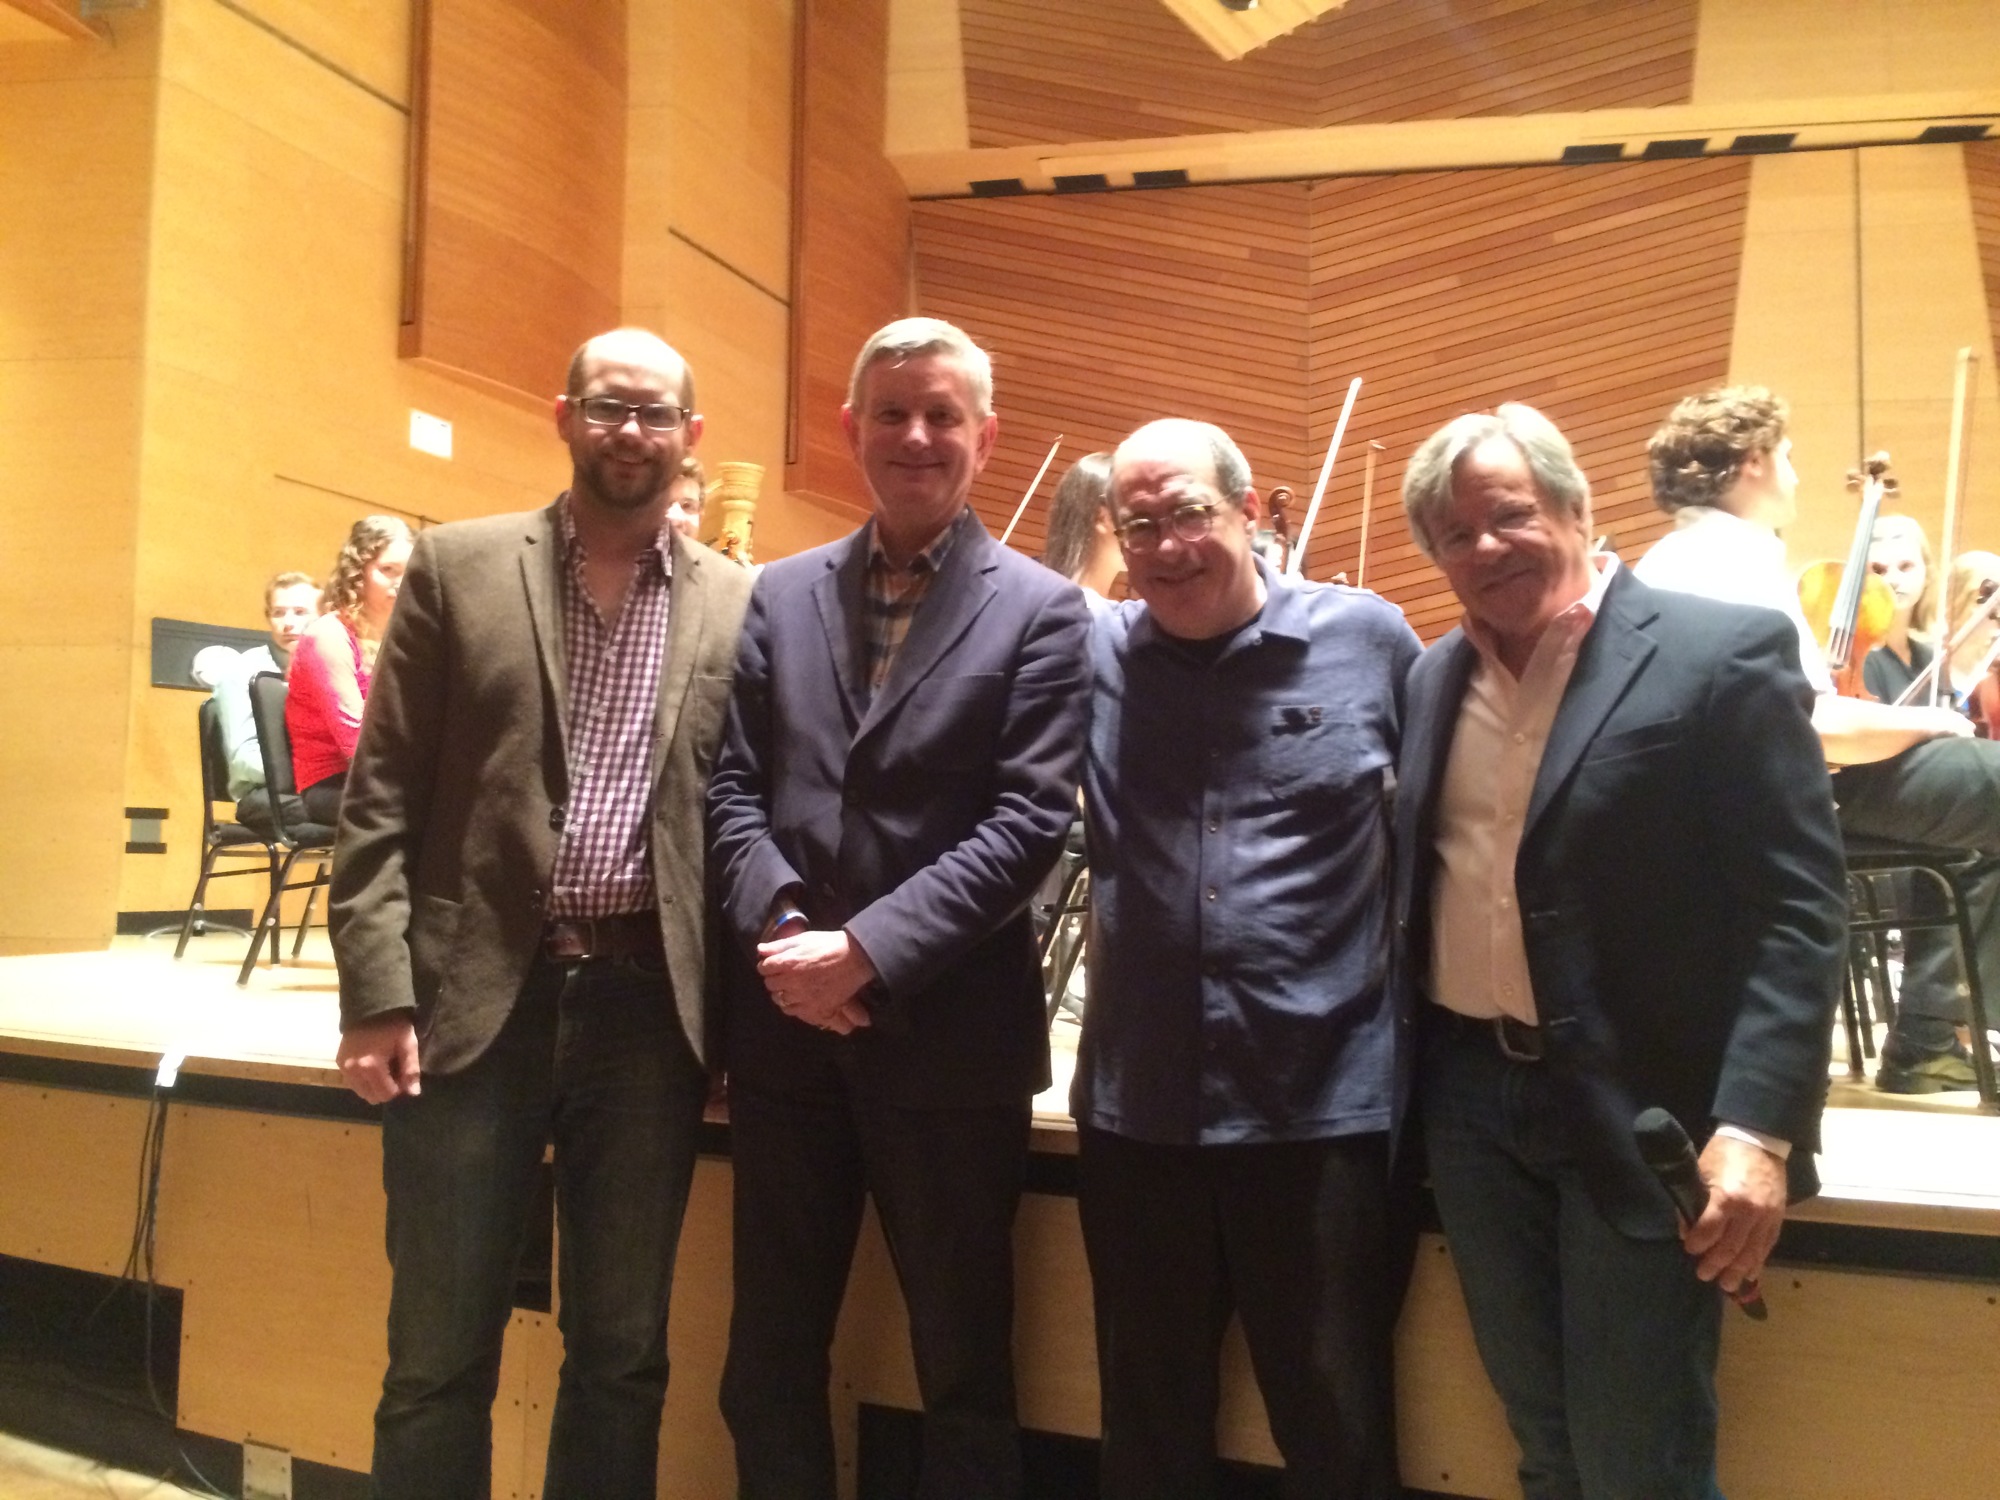 Phillip Sink, Alan Fletcher, Robert Spano and Bruce Rodgers at the Aspen Music Festival and School.